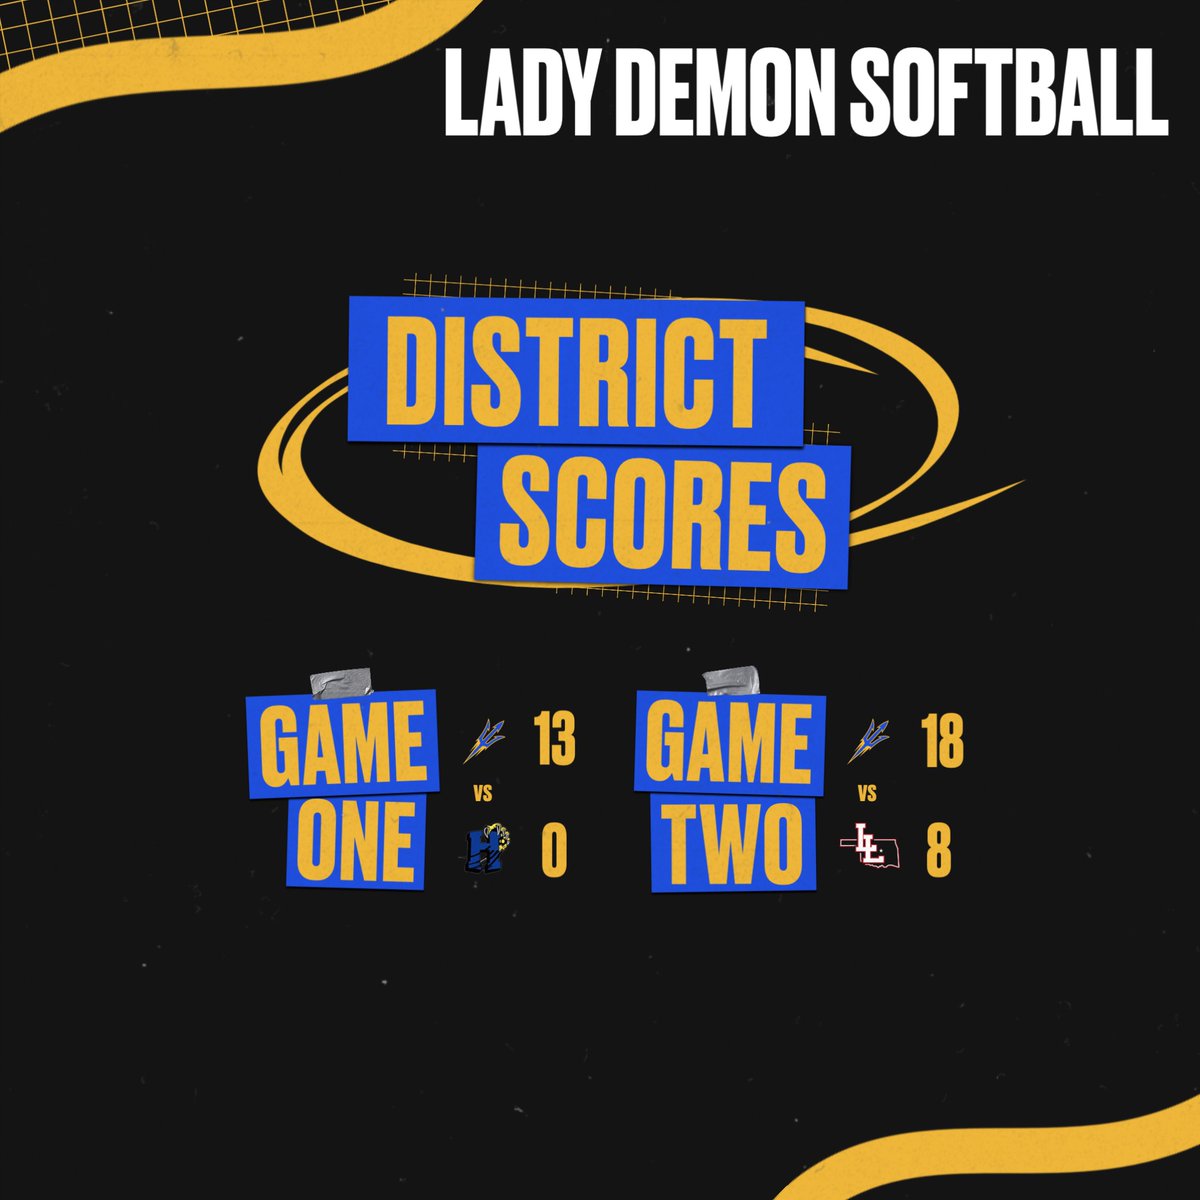 OUR LADY DEMONS ARE DISTRICT CHAMPS!